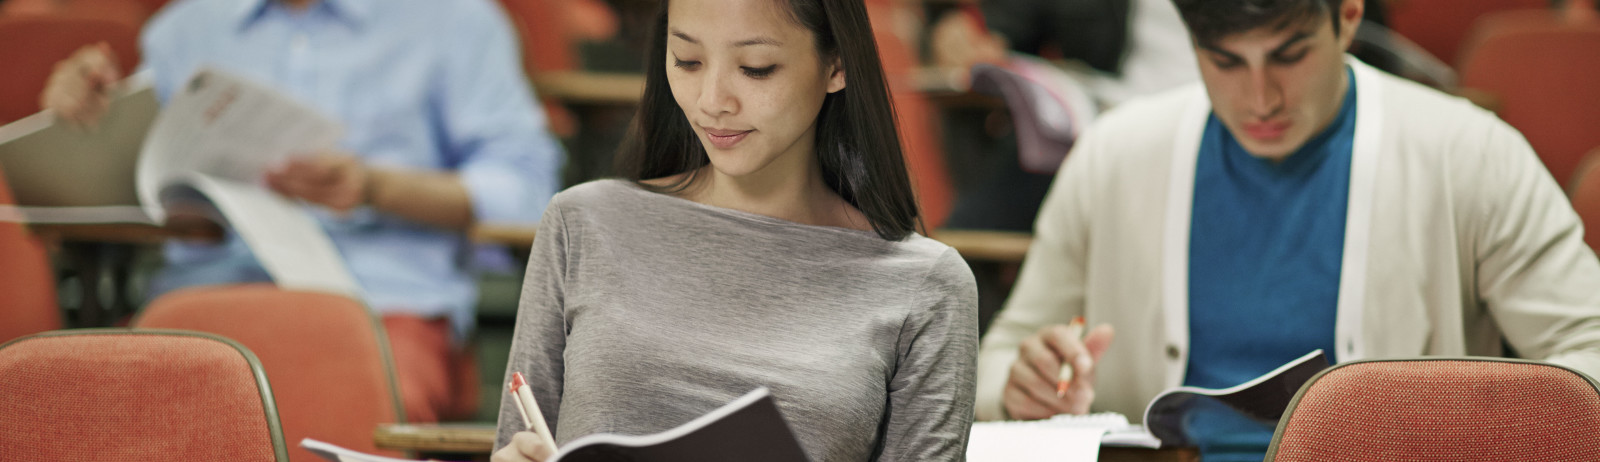 Female IELTS test taker wearing a grey full-sleeved t-shirt prepares for IELTS Writing along with other test takers.